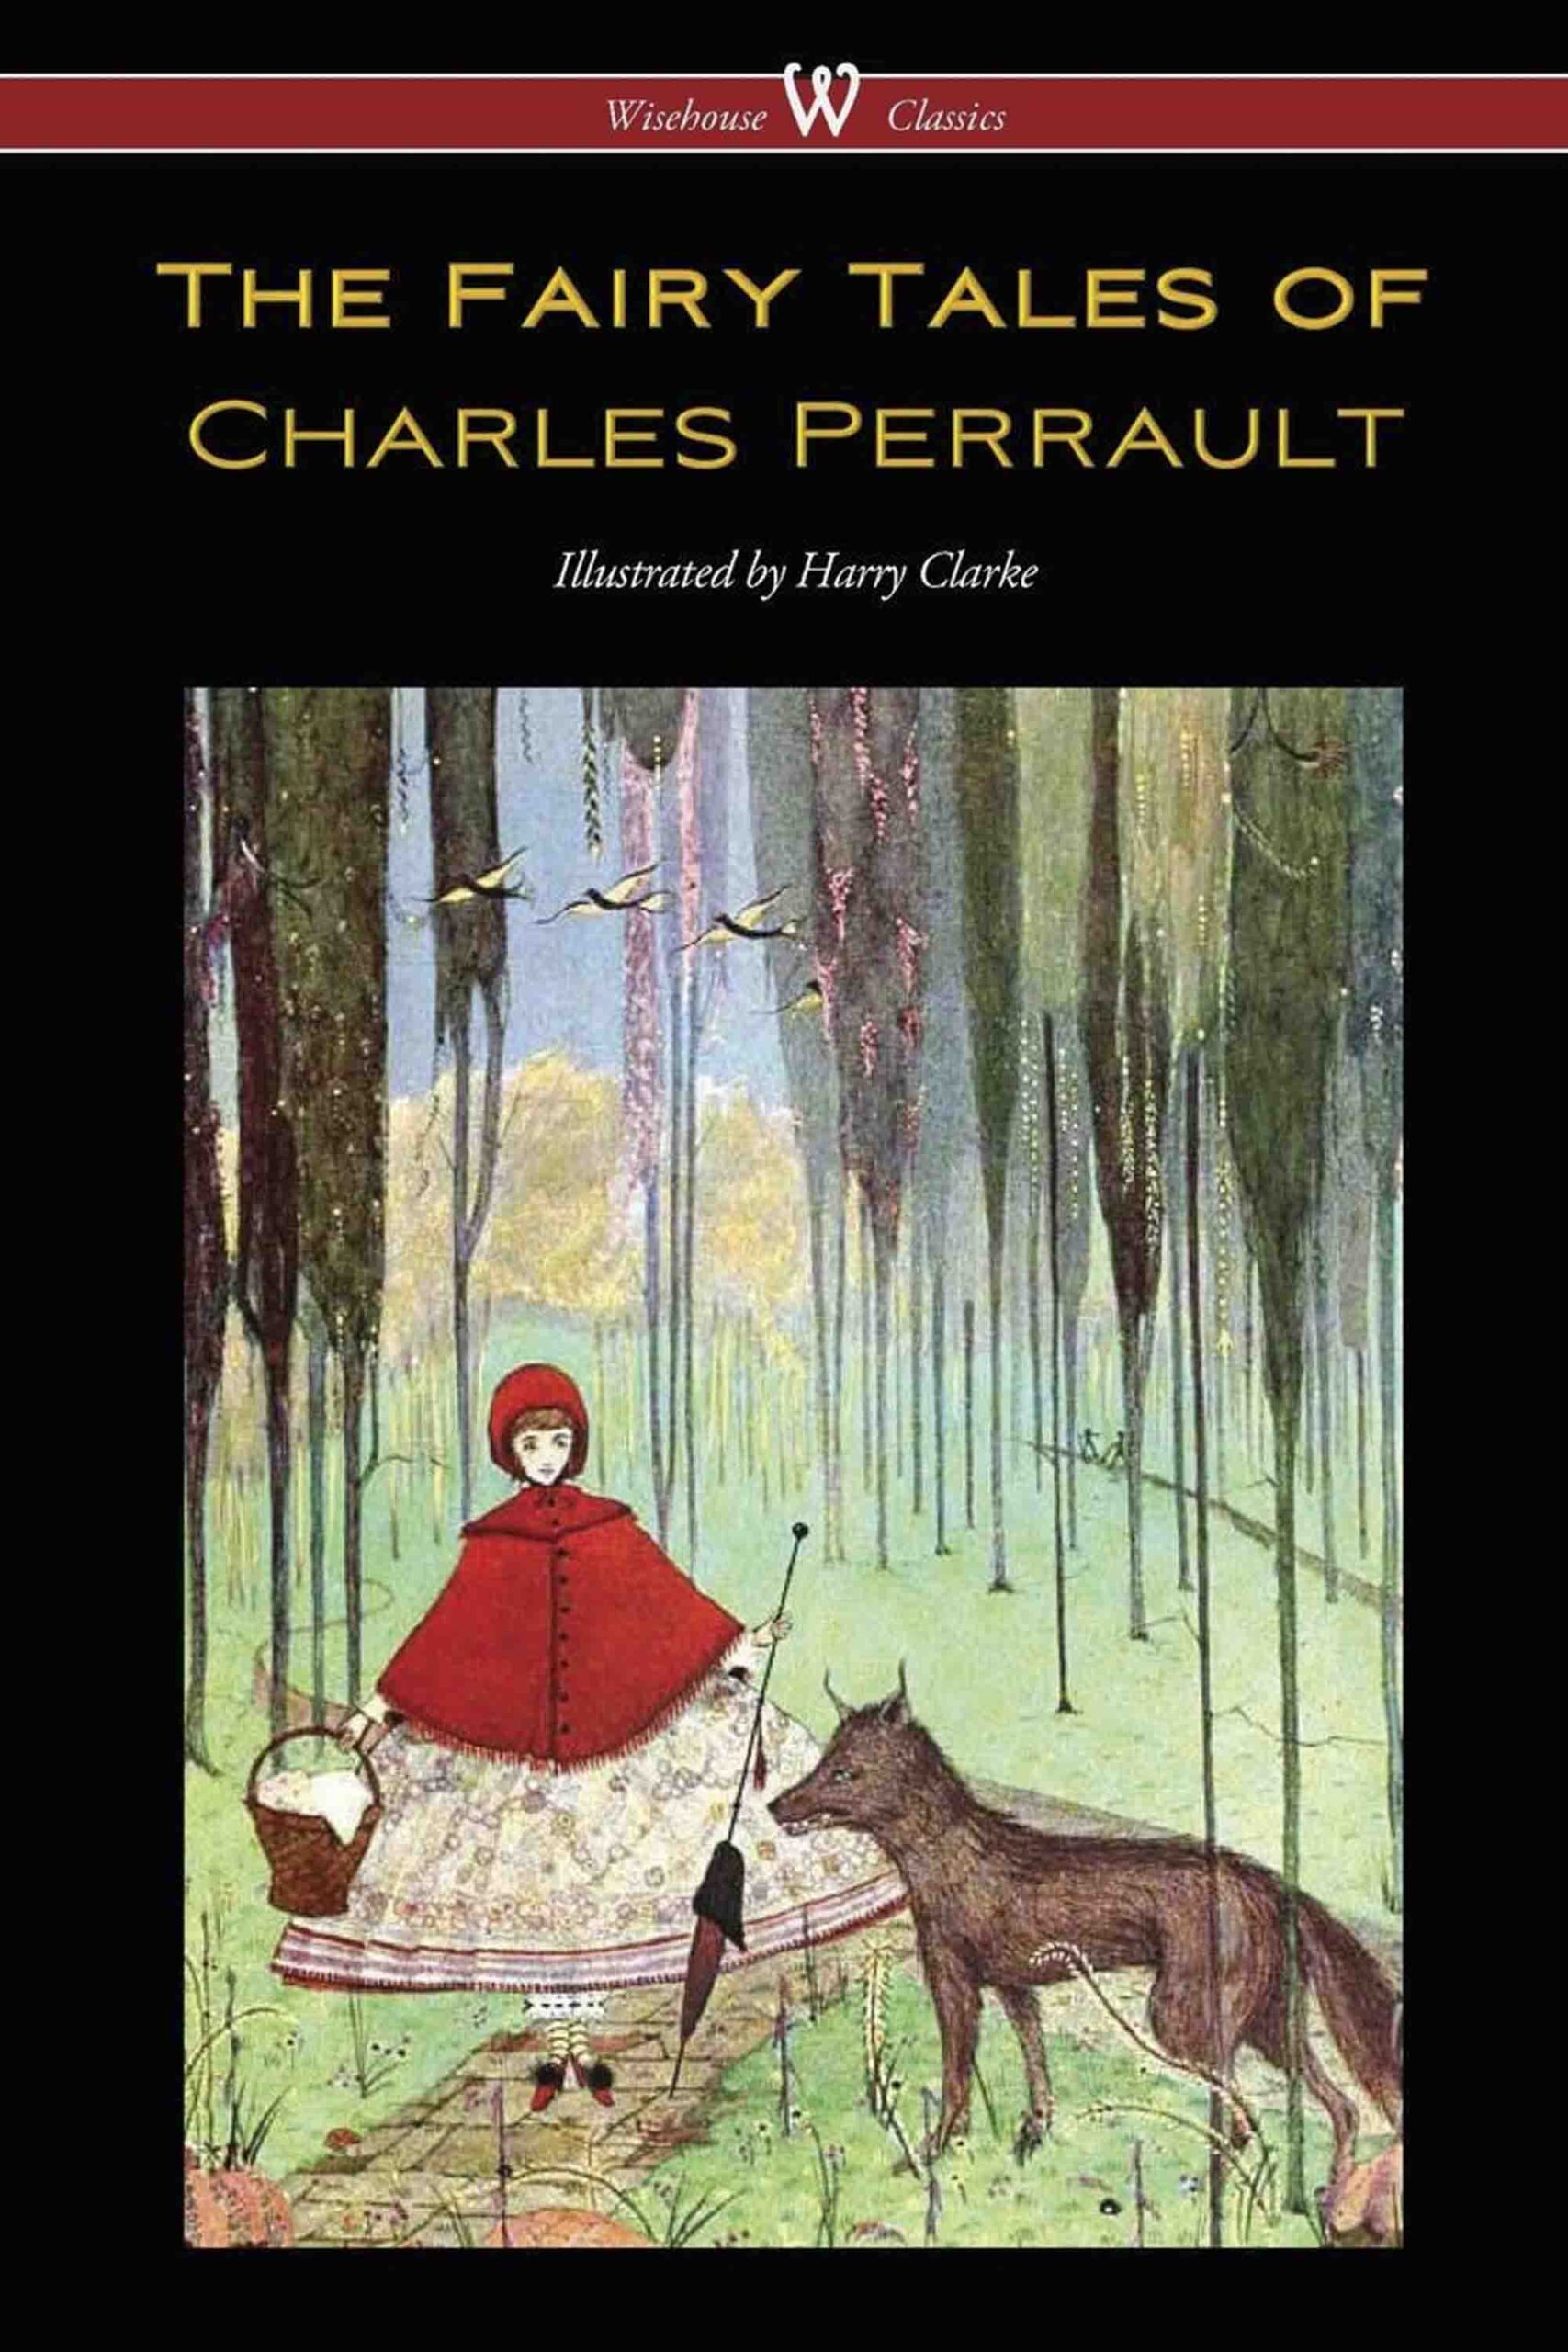 The Fairy Tales of Charles Perrault (Wisehouse Classics Edition – with original color illustrations by Harry Clarke)